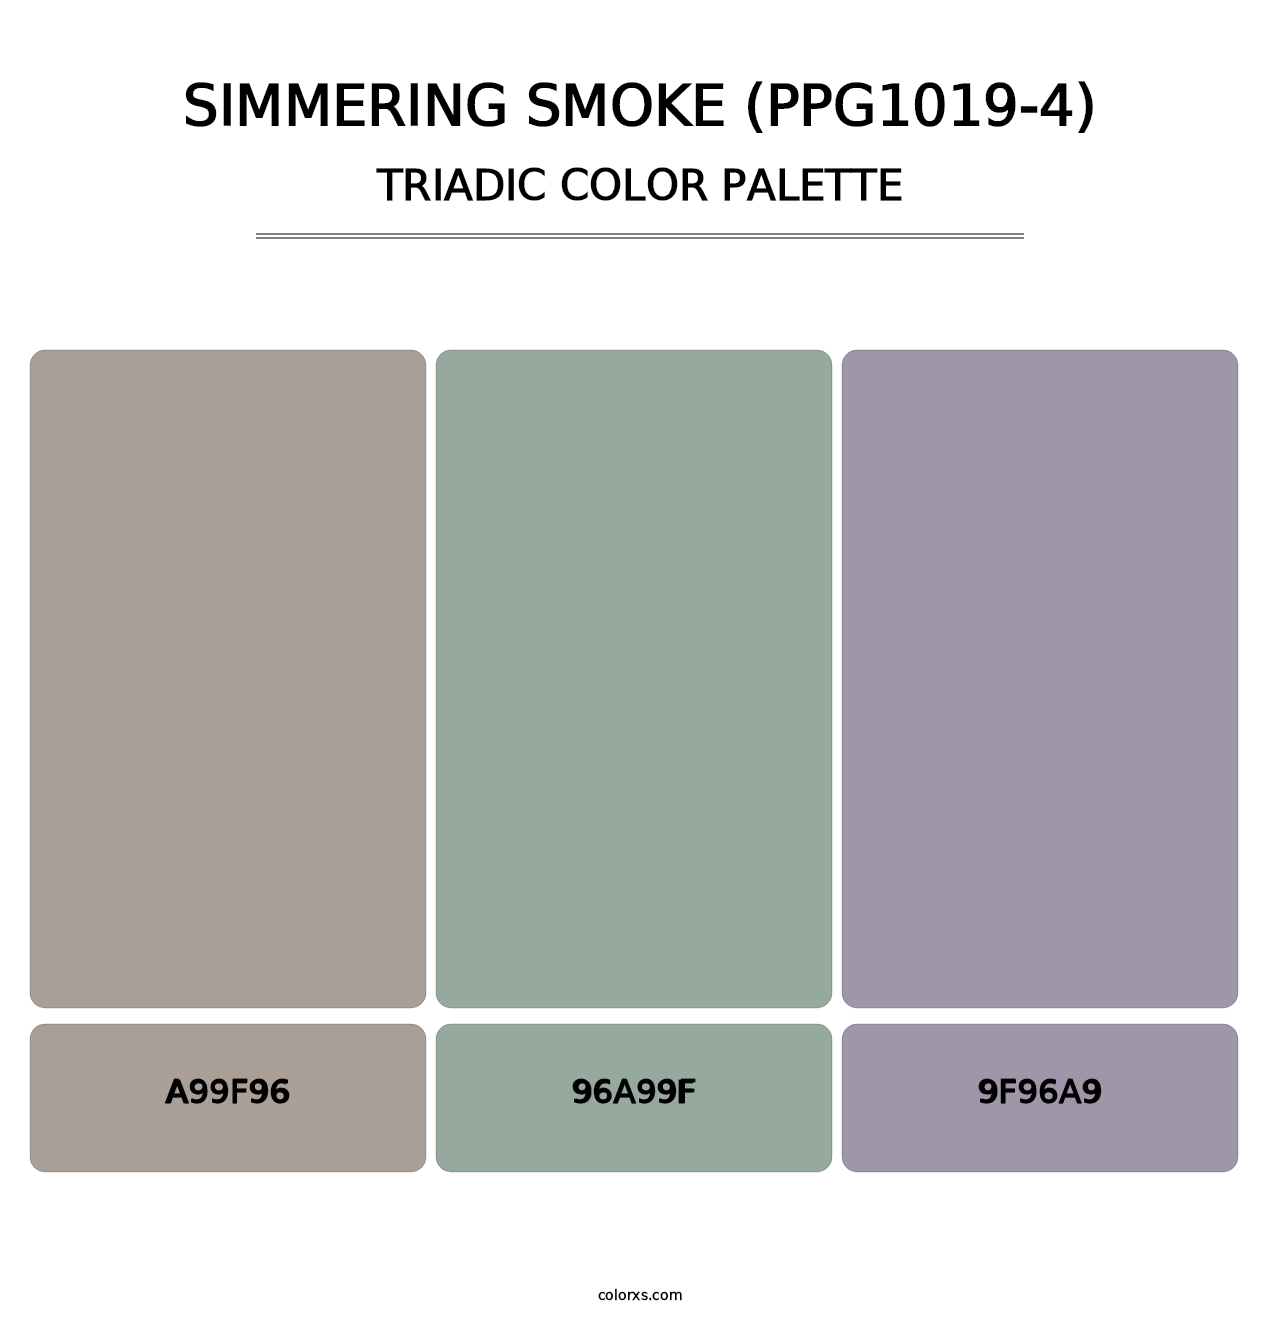 Simmering Smoke (PPG1019-4) - Triadic Color Palette